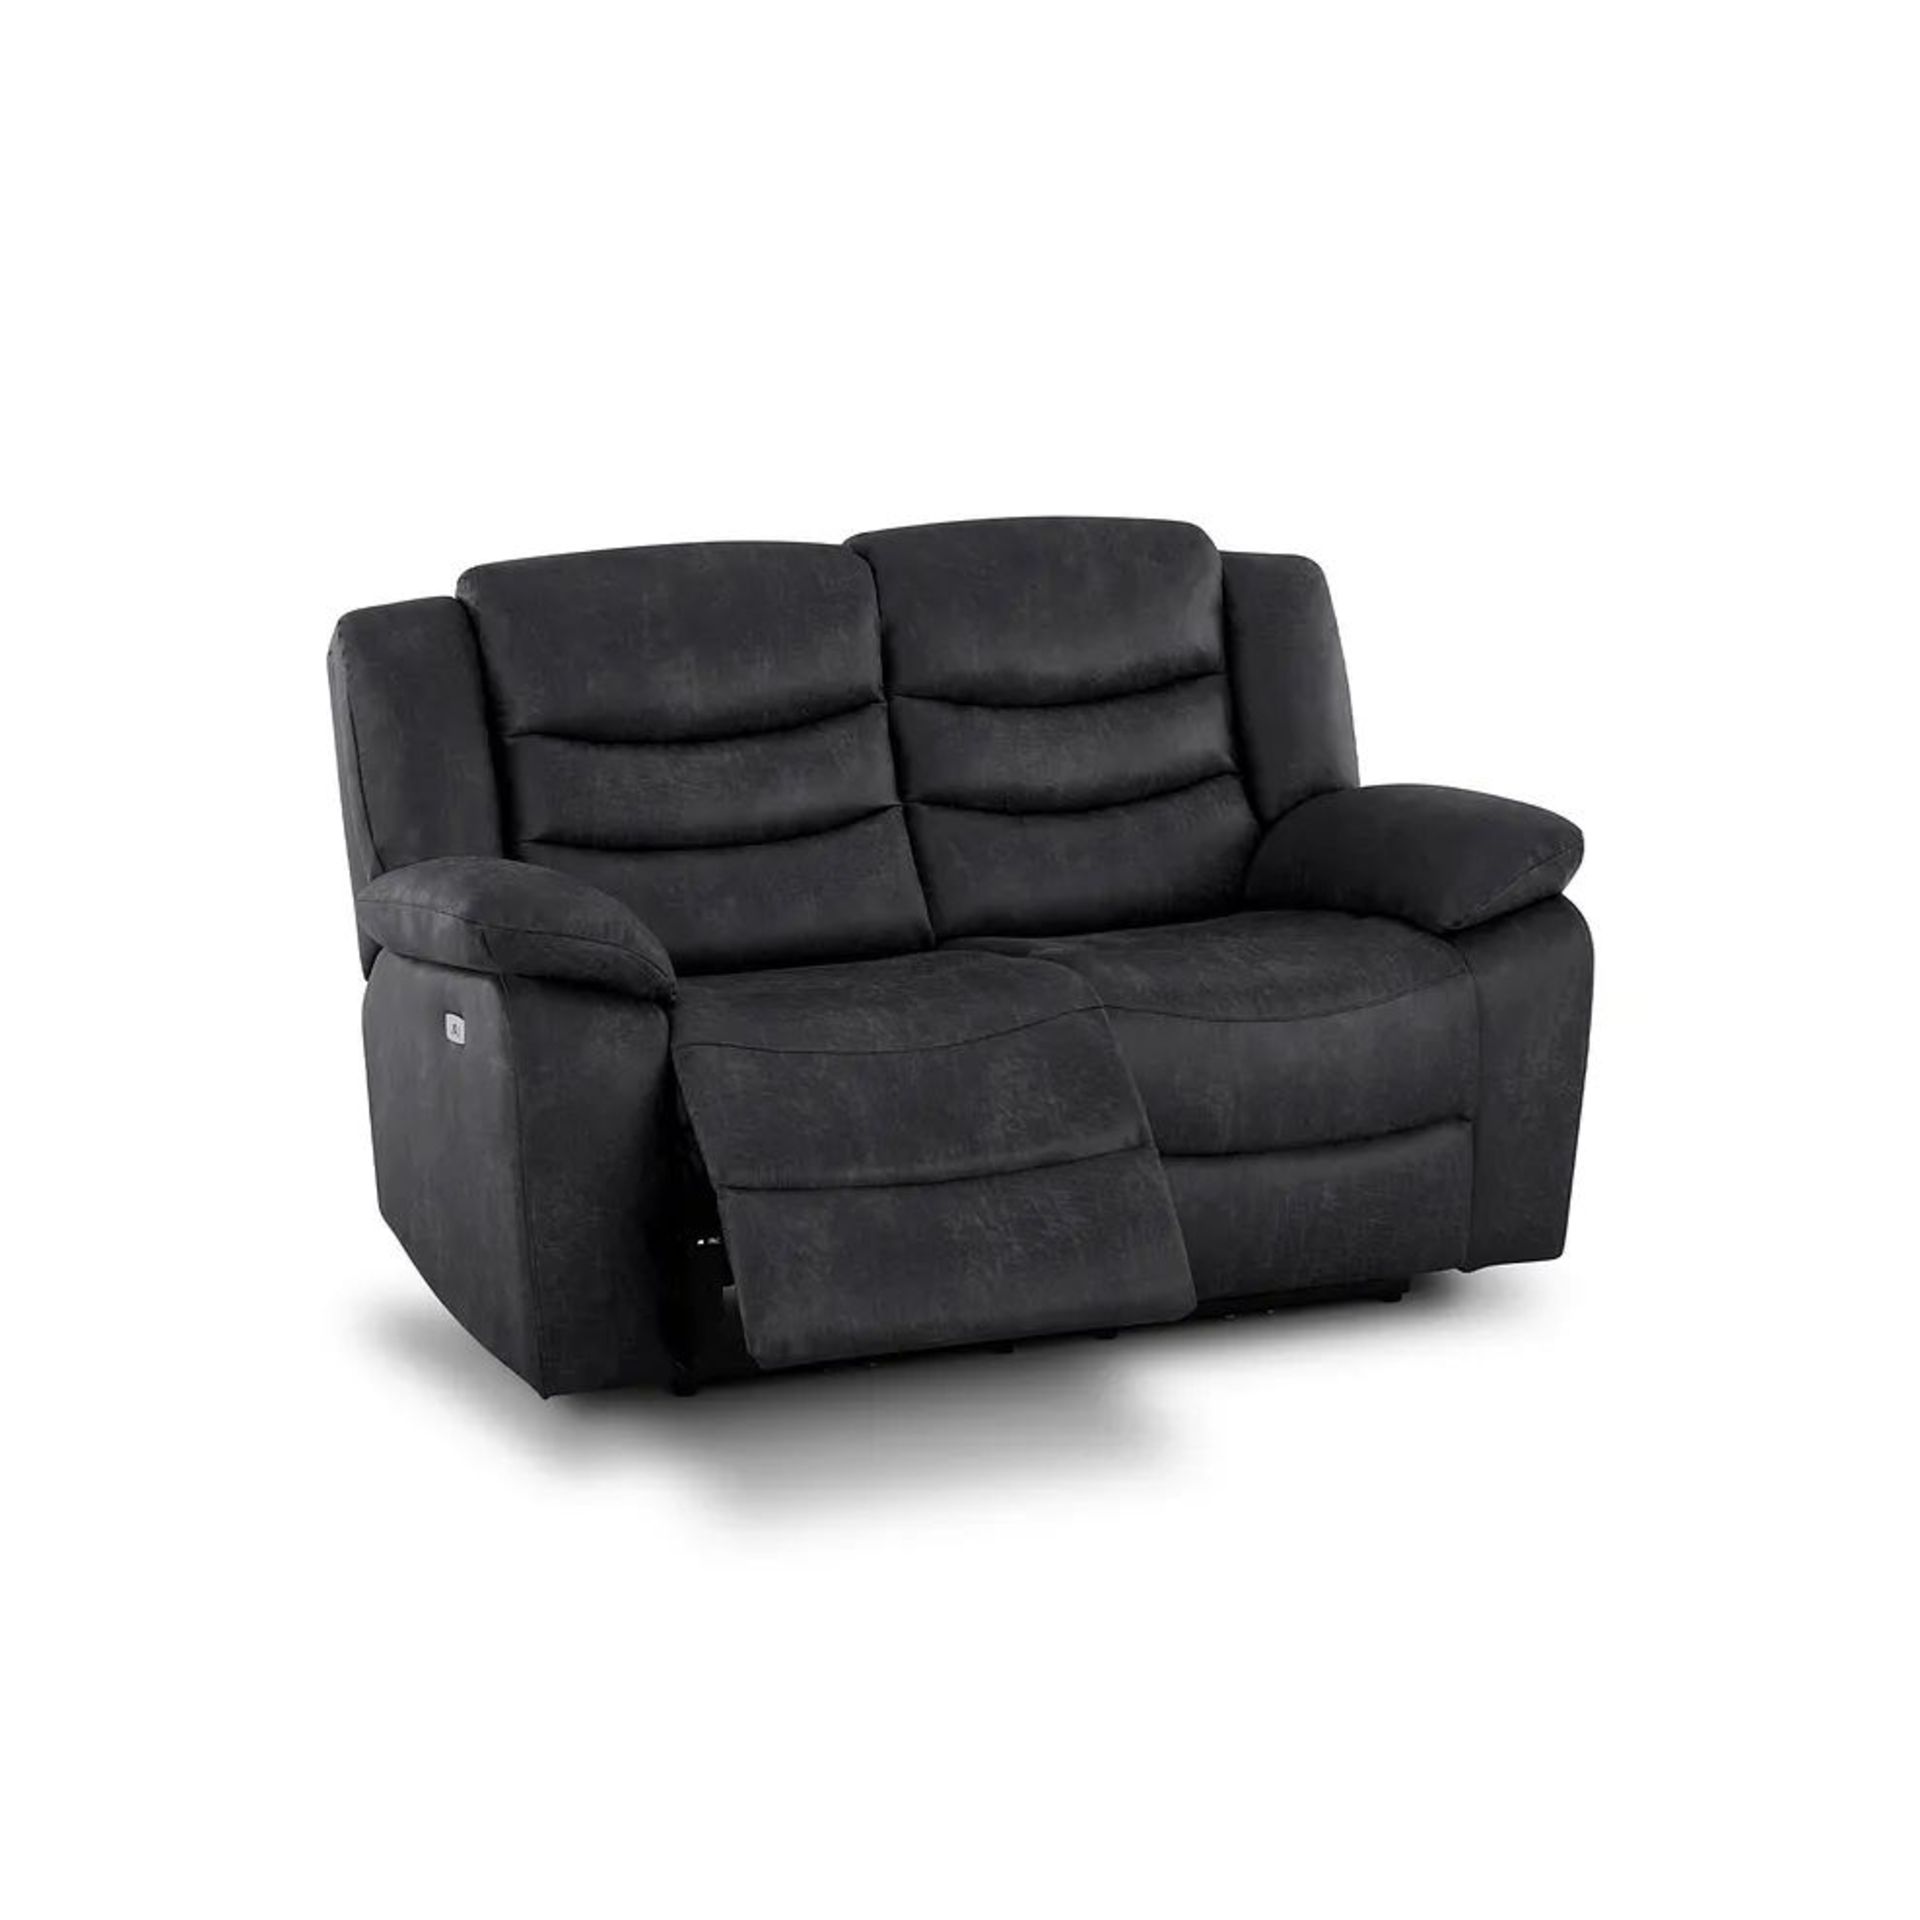 BRAND NEW MARLOW 2 Seater Electric Recliner Sofa - MILLER GREY FABRIC. RRP £1049. Designed to suit - Bild 3 aus 12